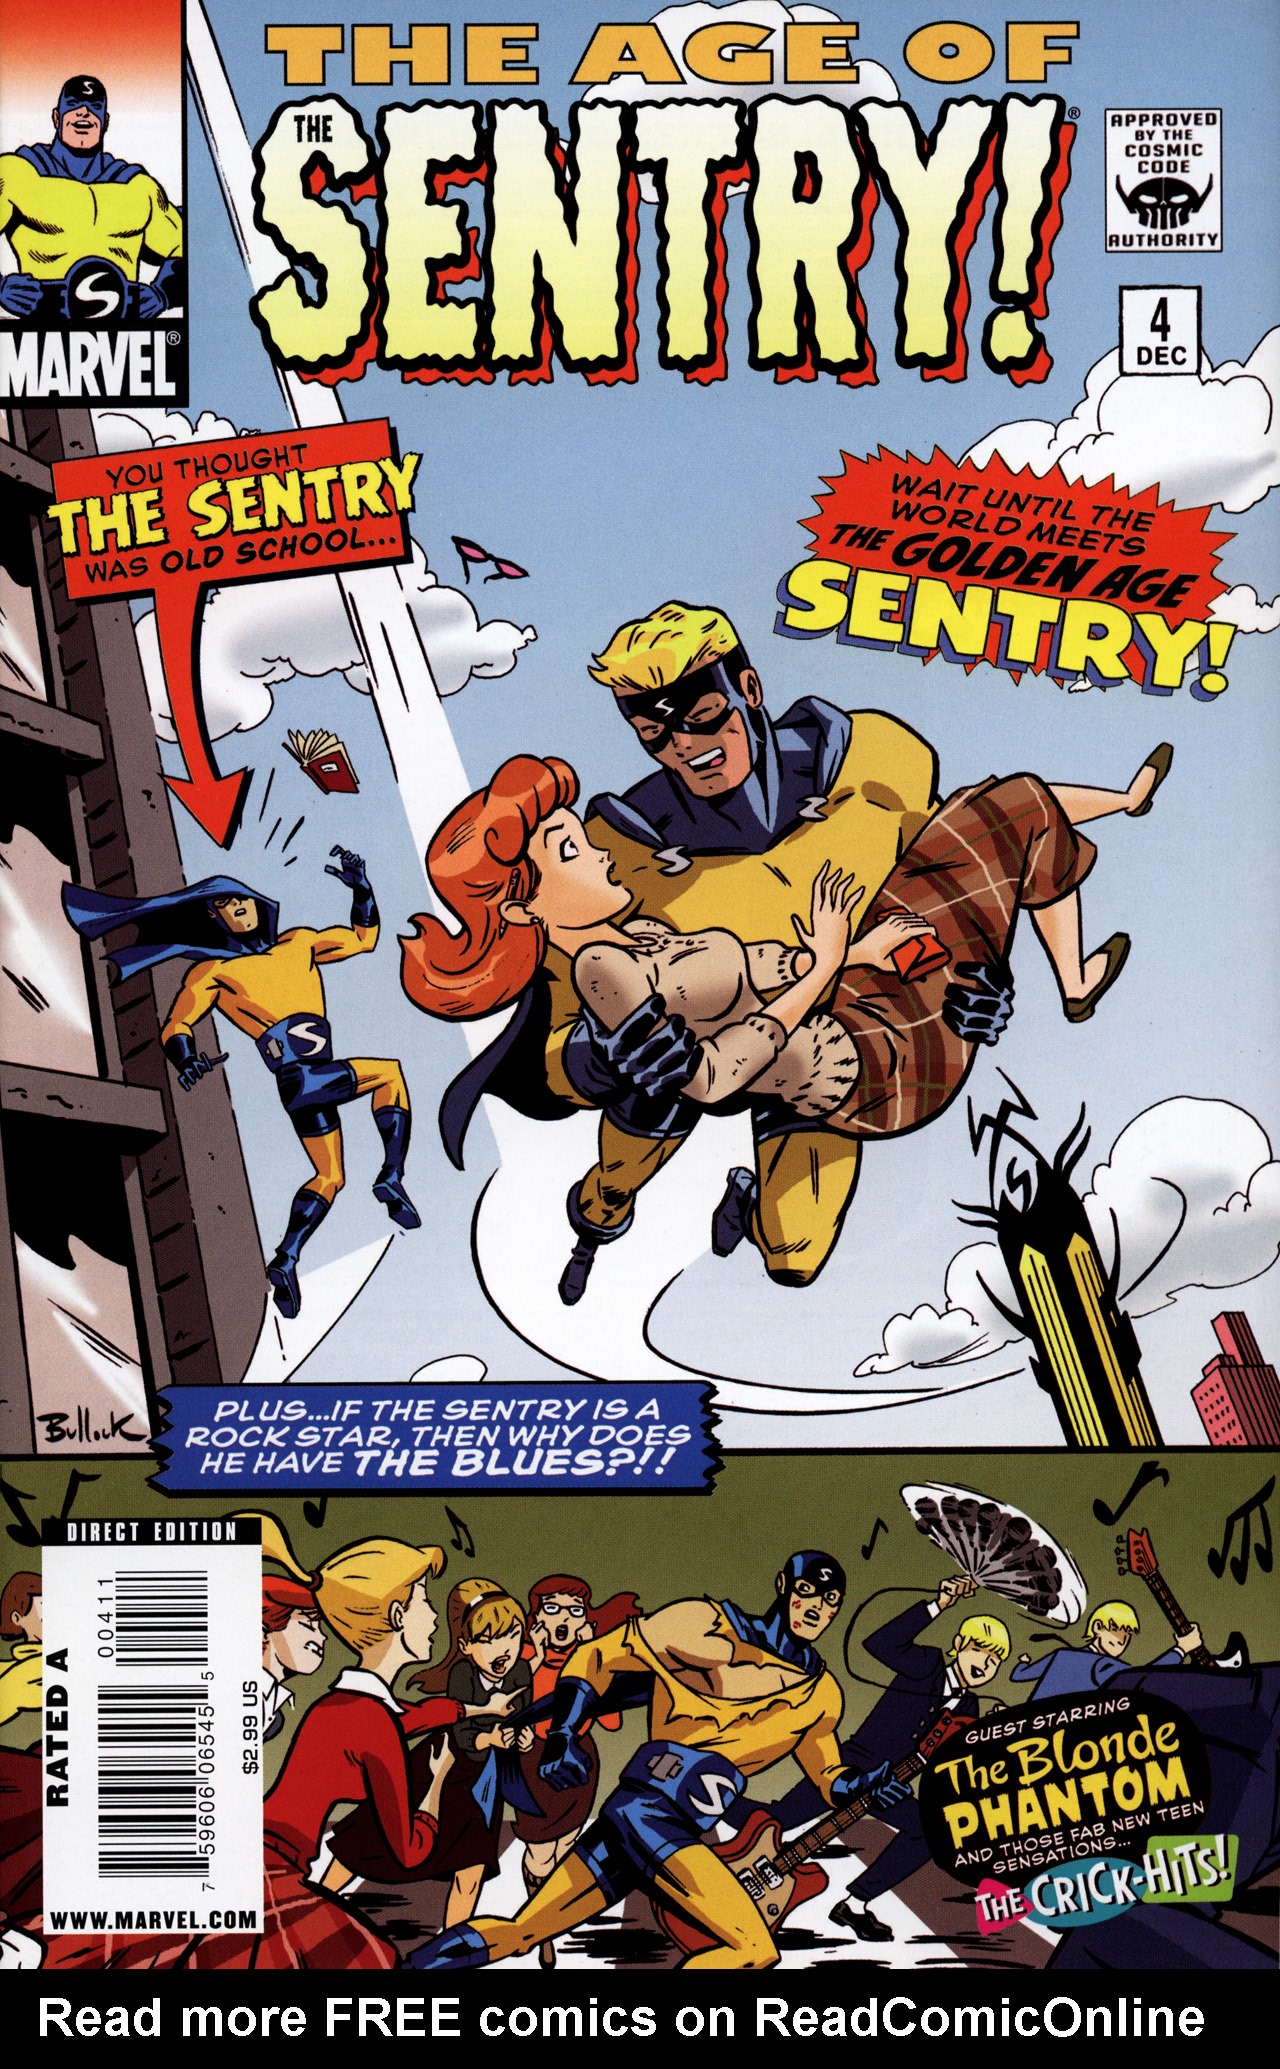 Read online The Age of the Sentry comic -  Issue #4 - 1